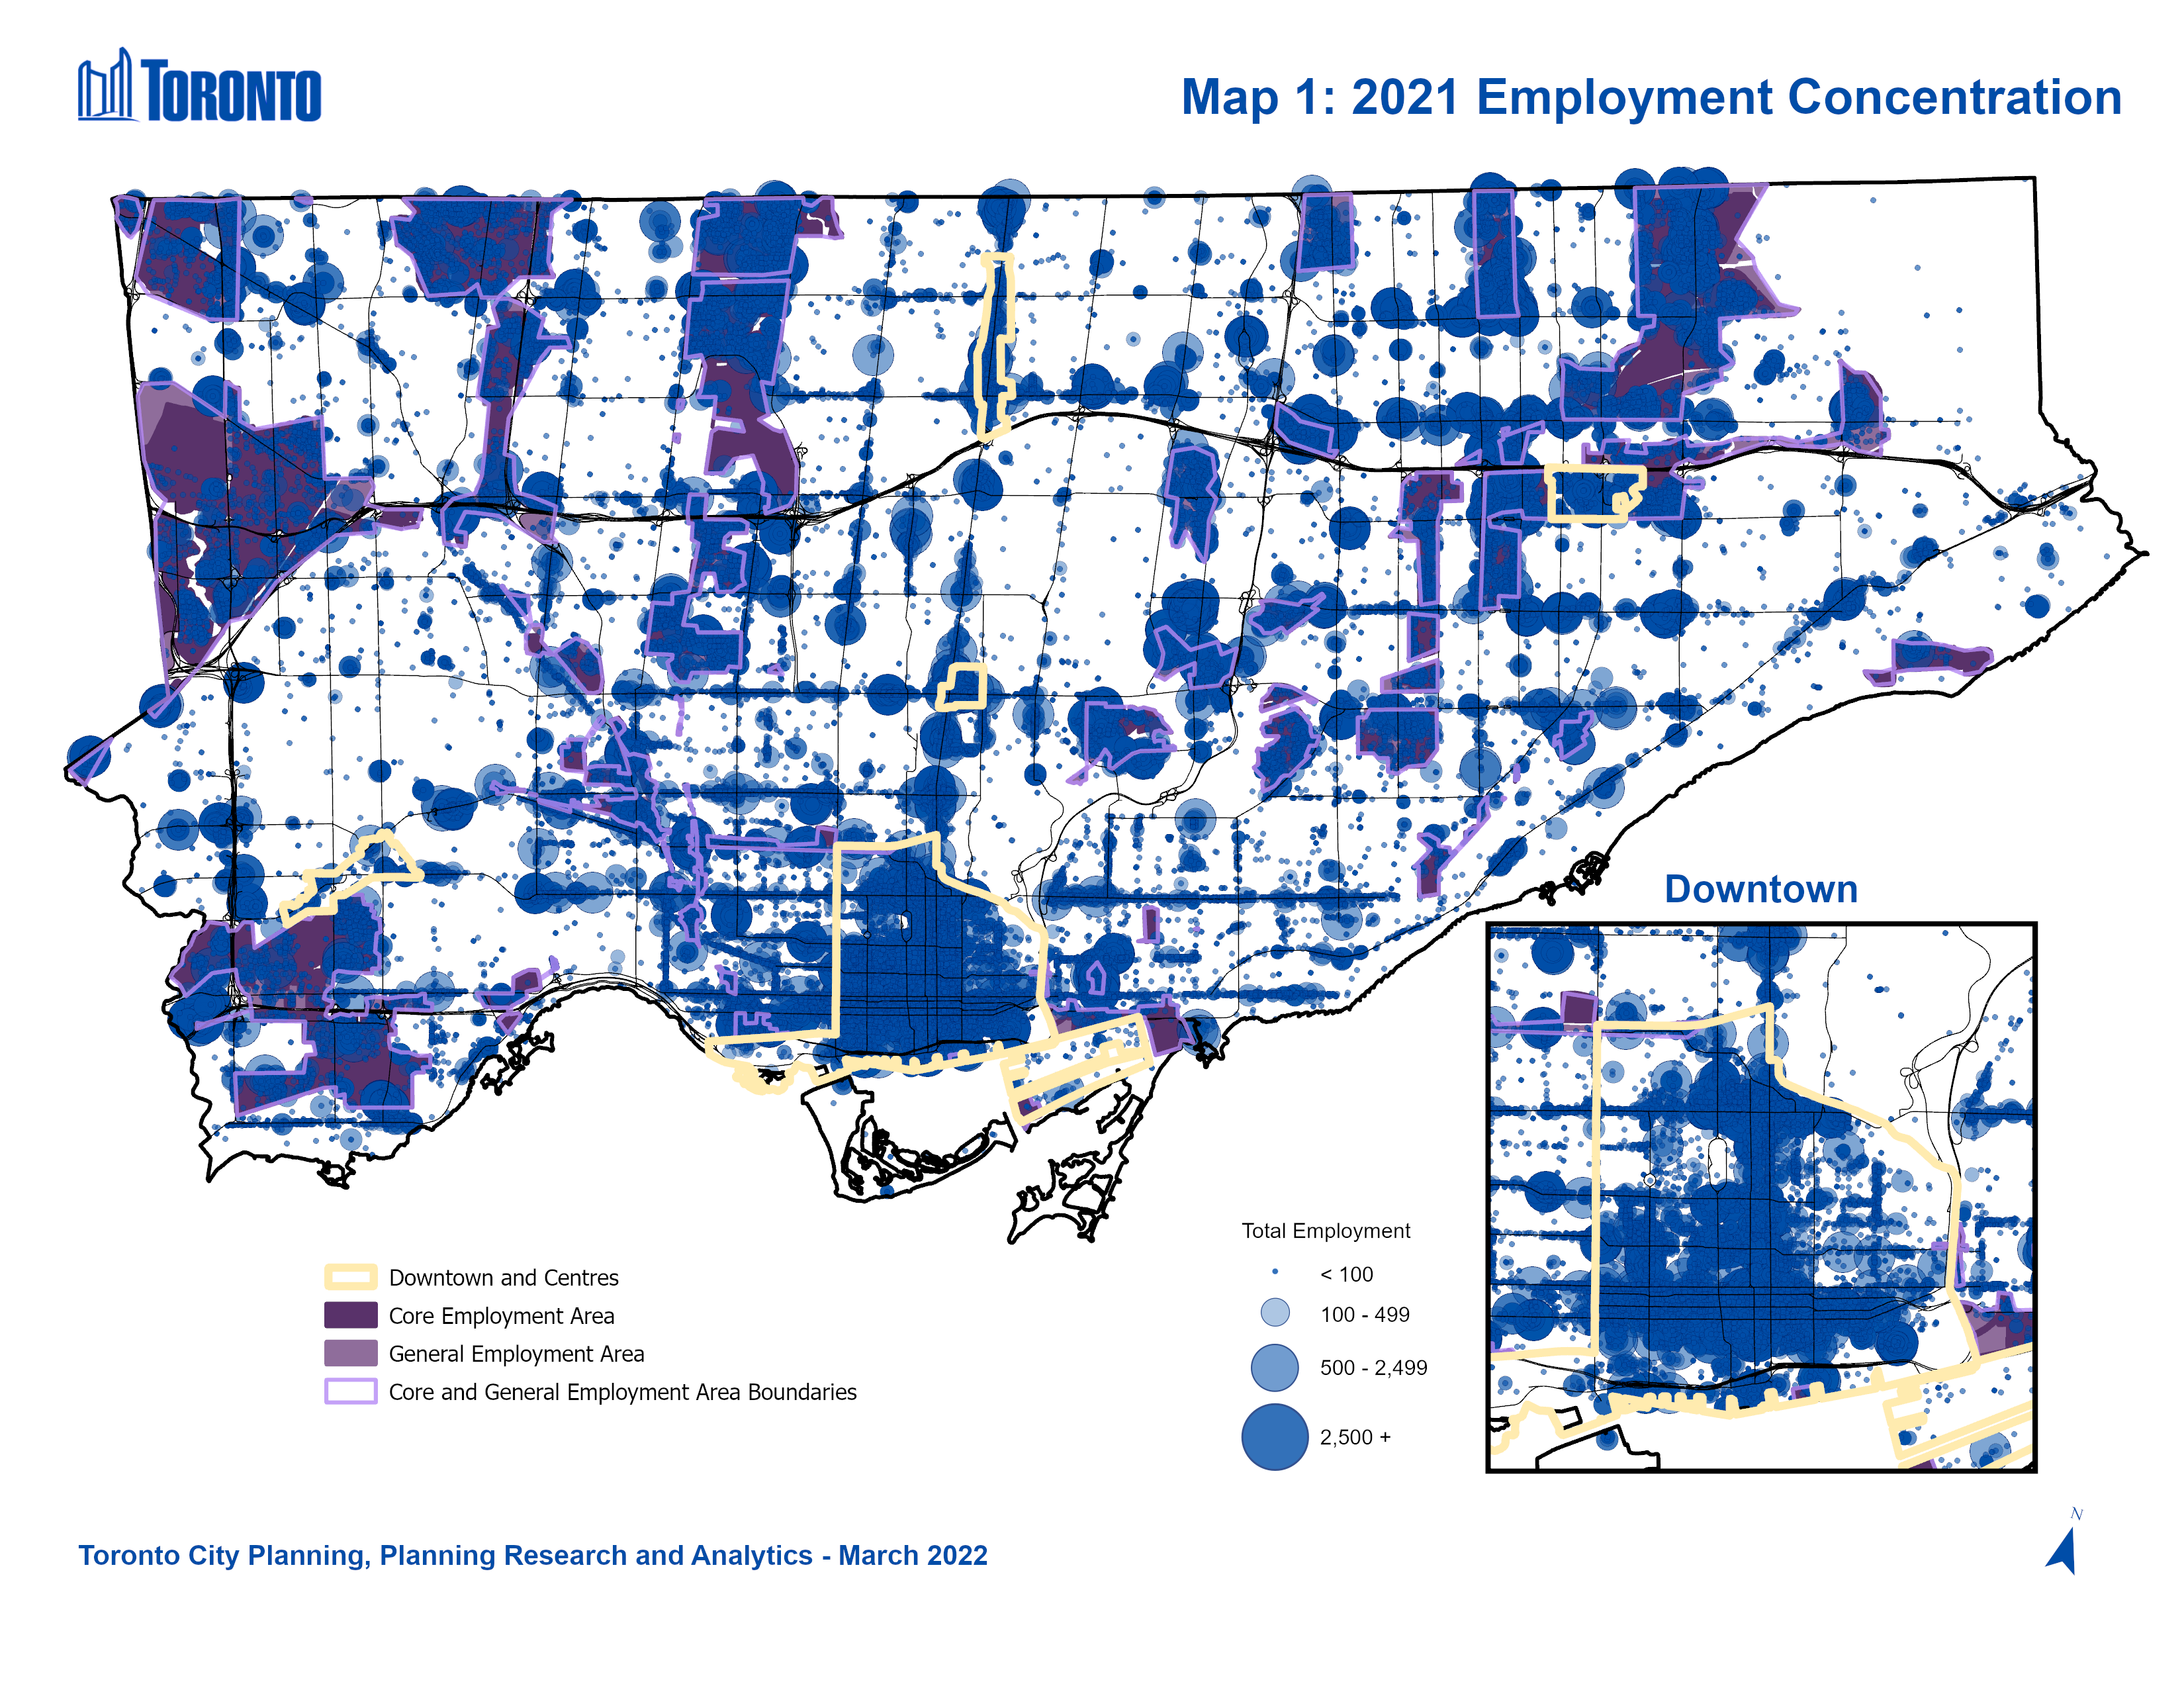 Employment Concentrations, City of Toronto. This map shows locations of all establishments in the city, with graduated symbols for establishments (1) having less than 100 employees, (2) having between 100 and 499 employees (3) having between 500 and 2,499 employees and (4) having over 2,500 employees.